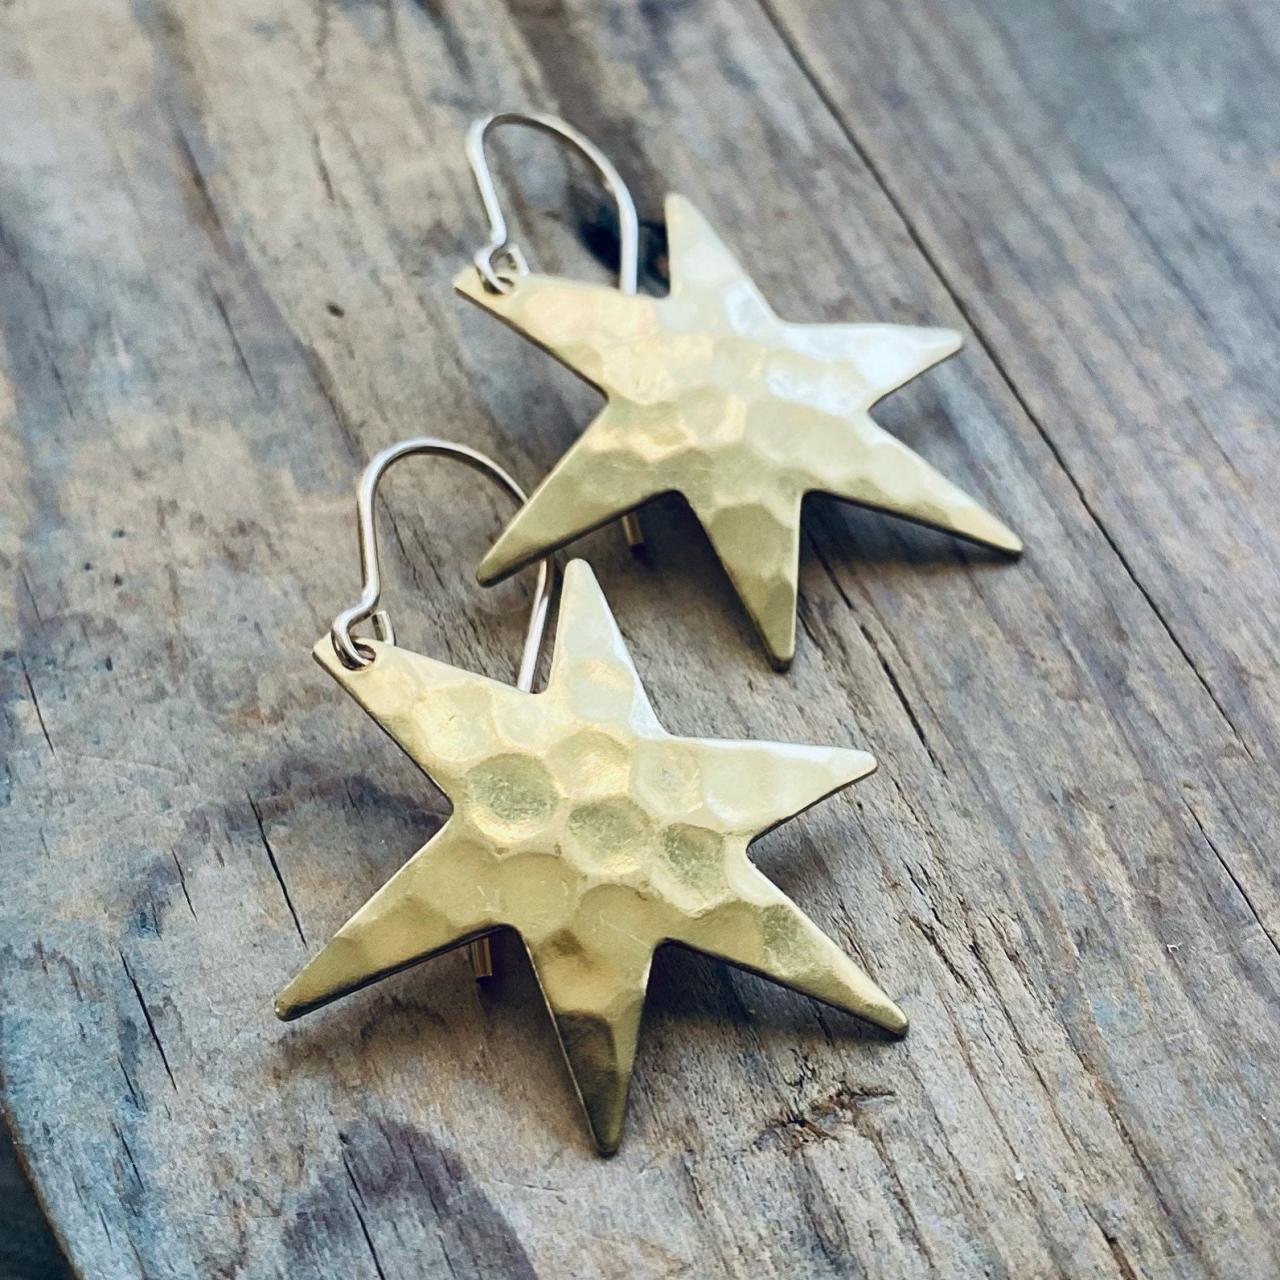 Brass Star Earrings Celestial Charms Charm Jewelry Hammered Metal Gold Simple Gifts Under 30 Gold Filled Gifts For Her